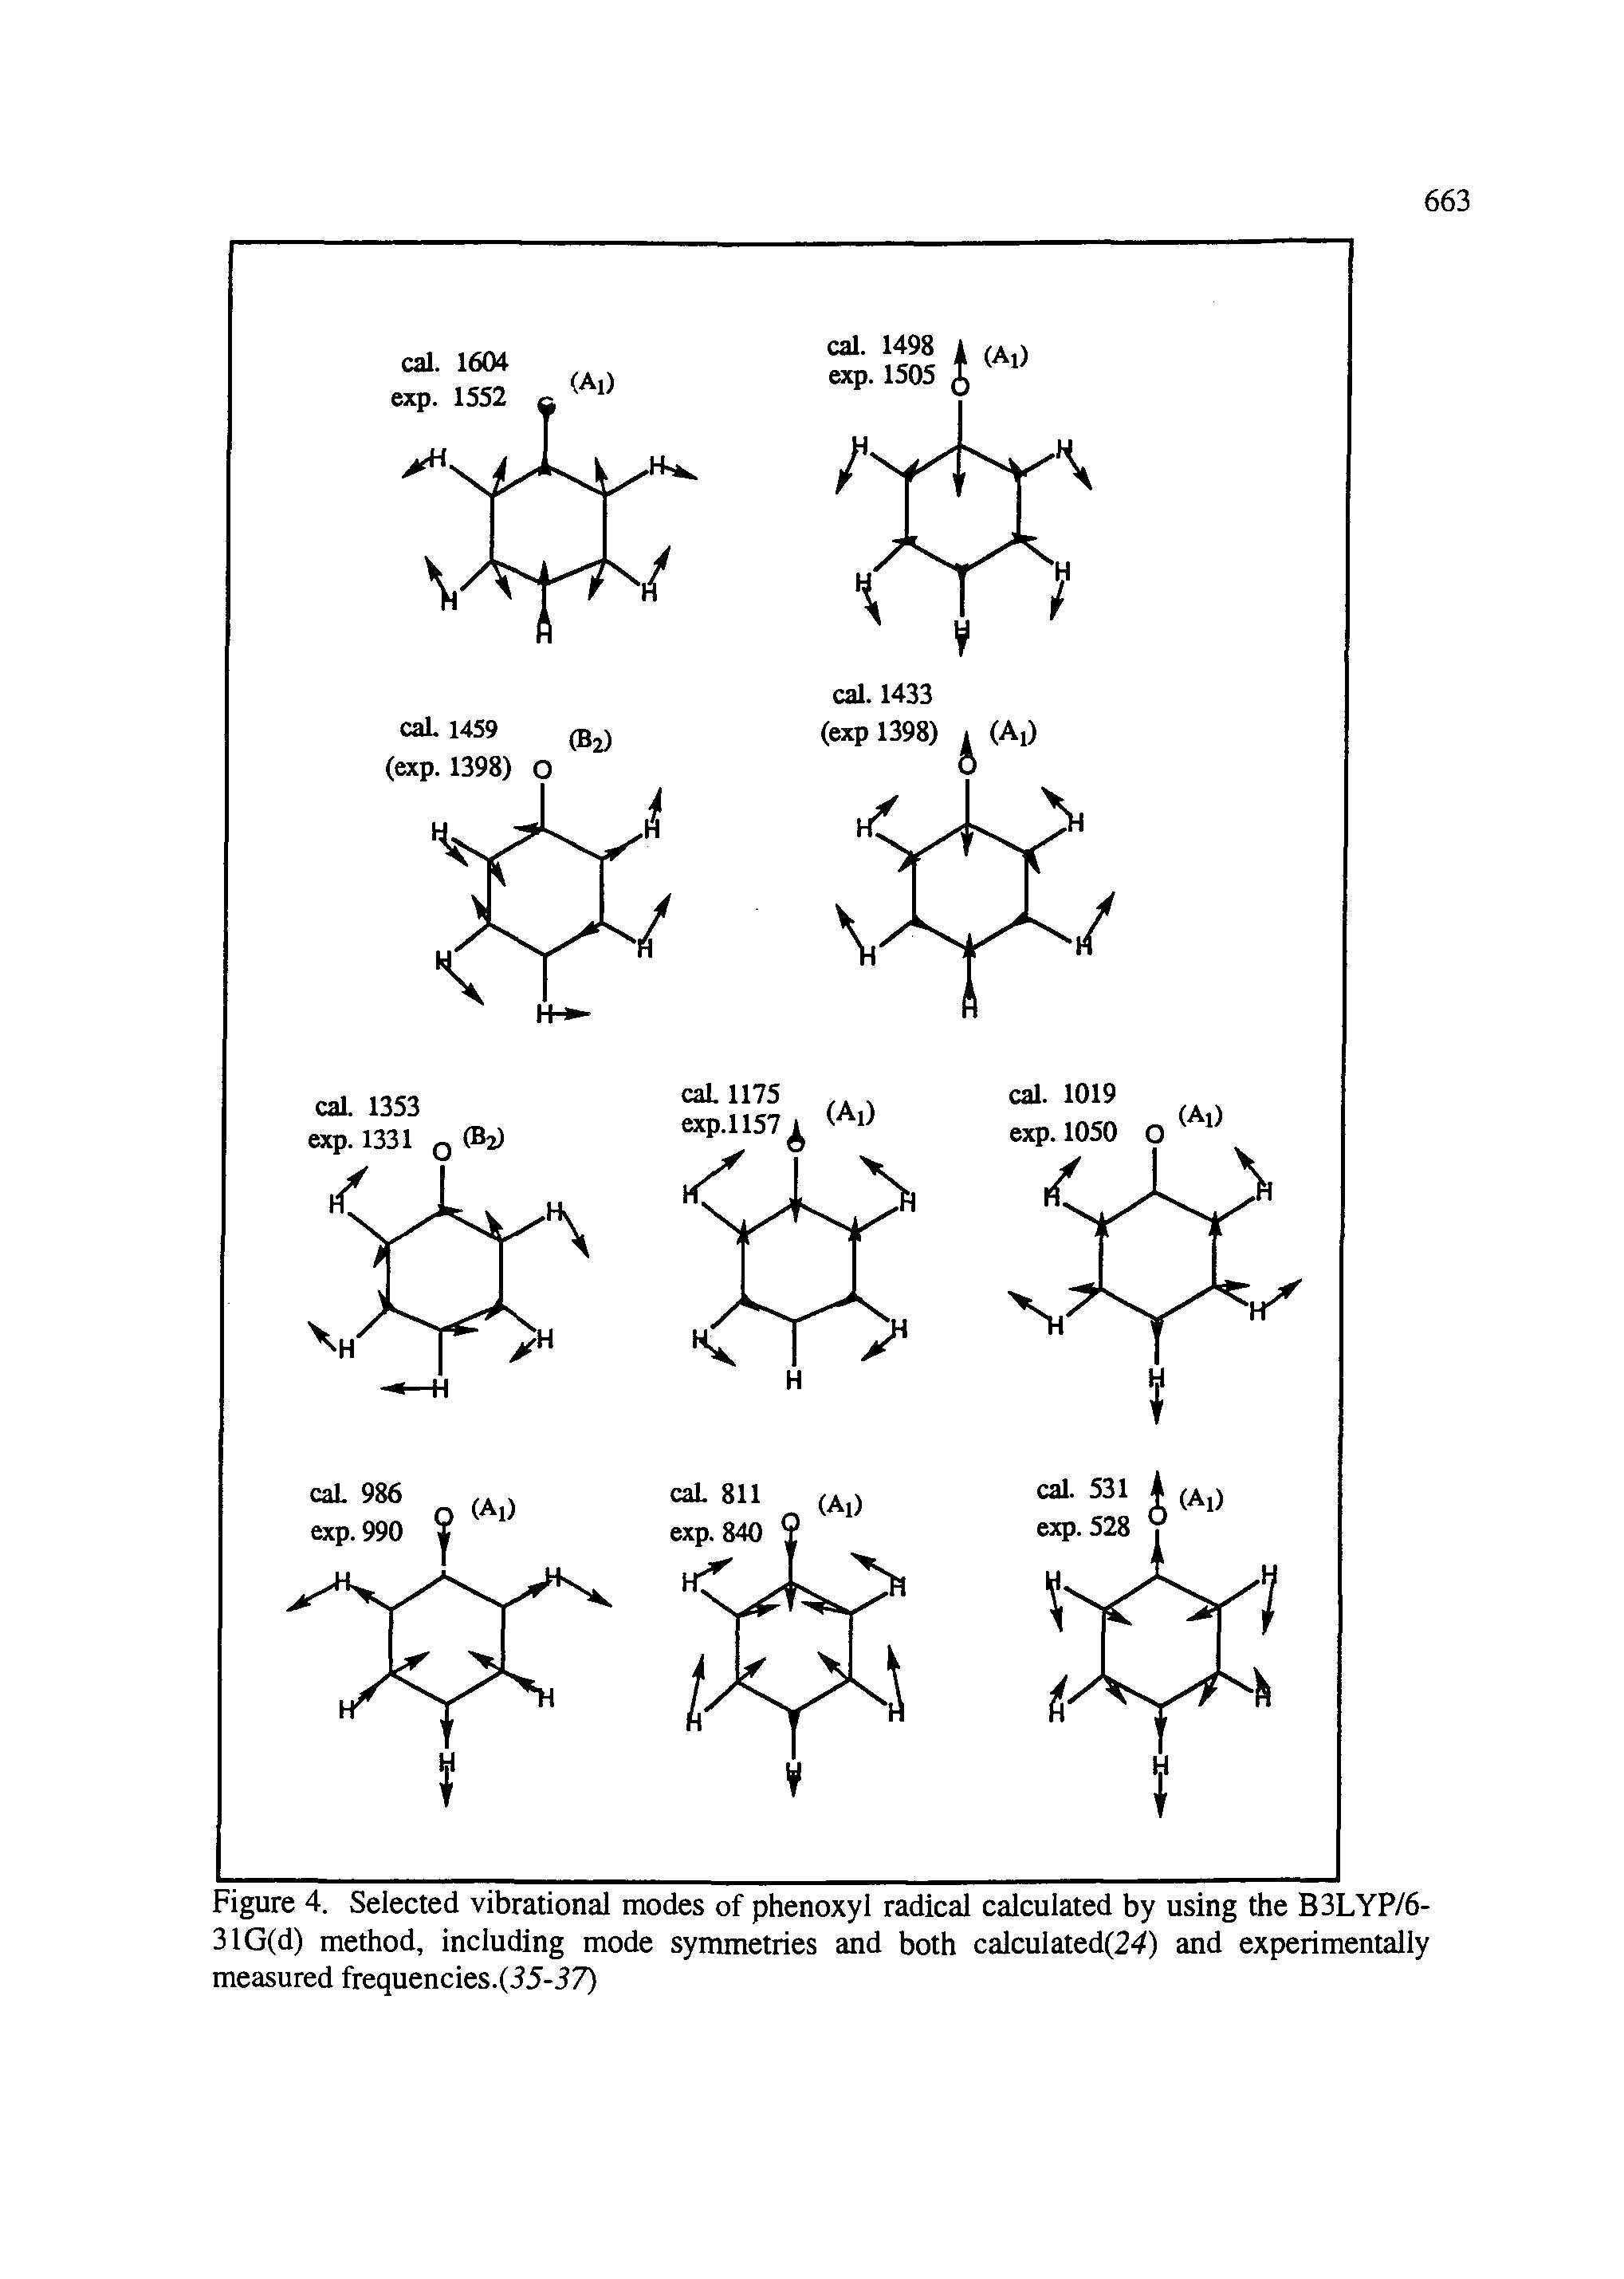 Figure 4. Selected vibrational modes of phenoxyl radical calculated by using the B3LYP/6-31G(d) method, including mode symmetries and both calculated(24) and experimentally measured frequencies.(i5-57)...